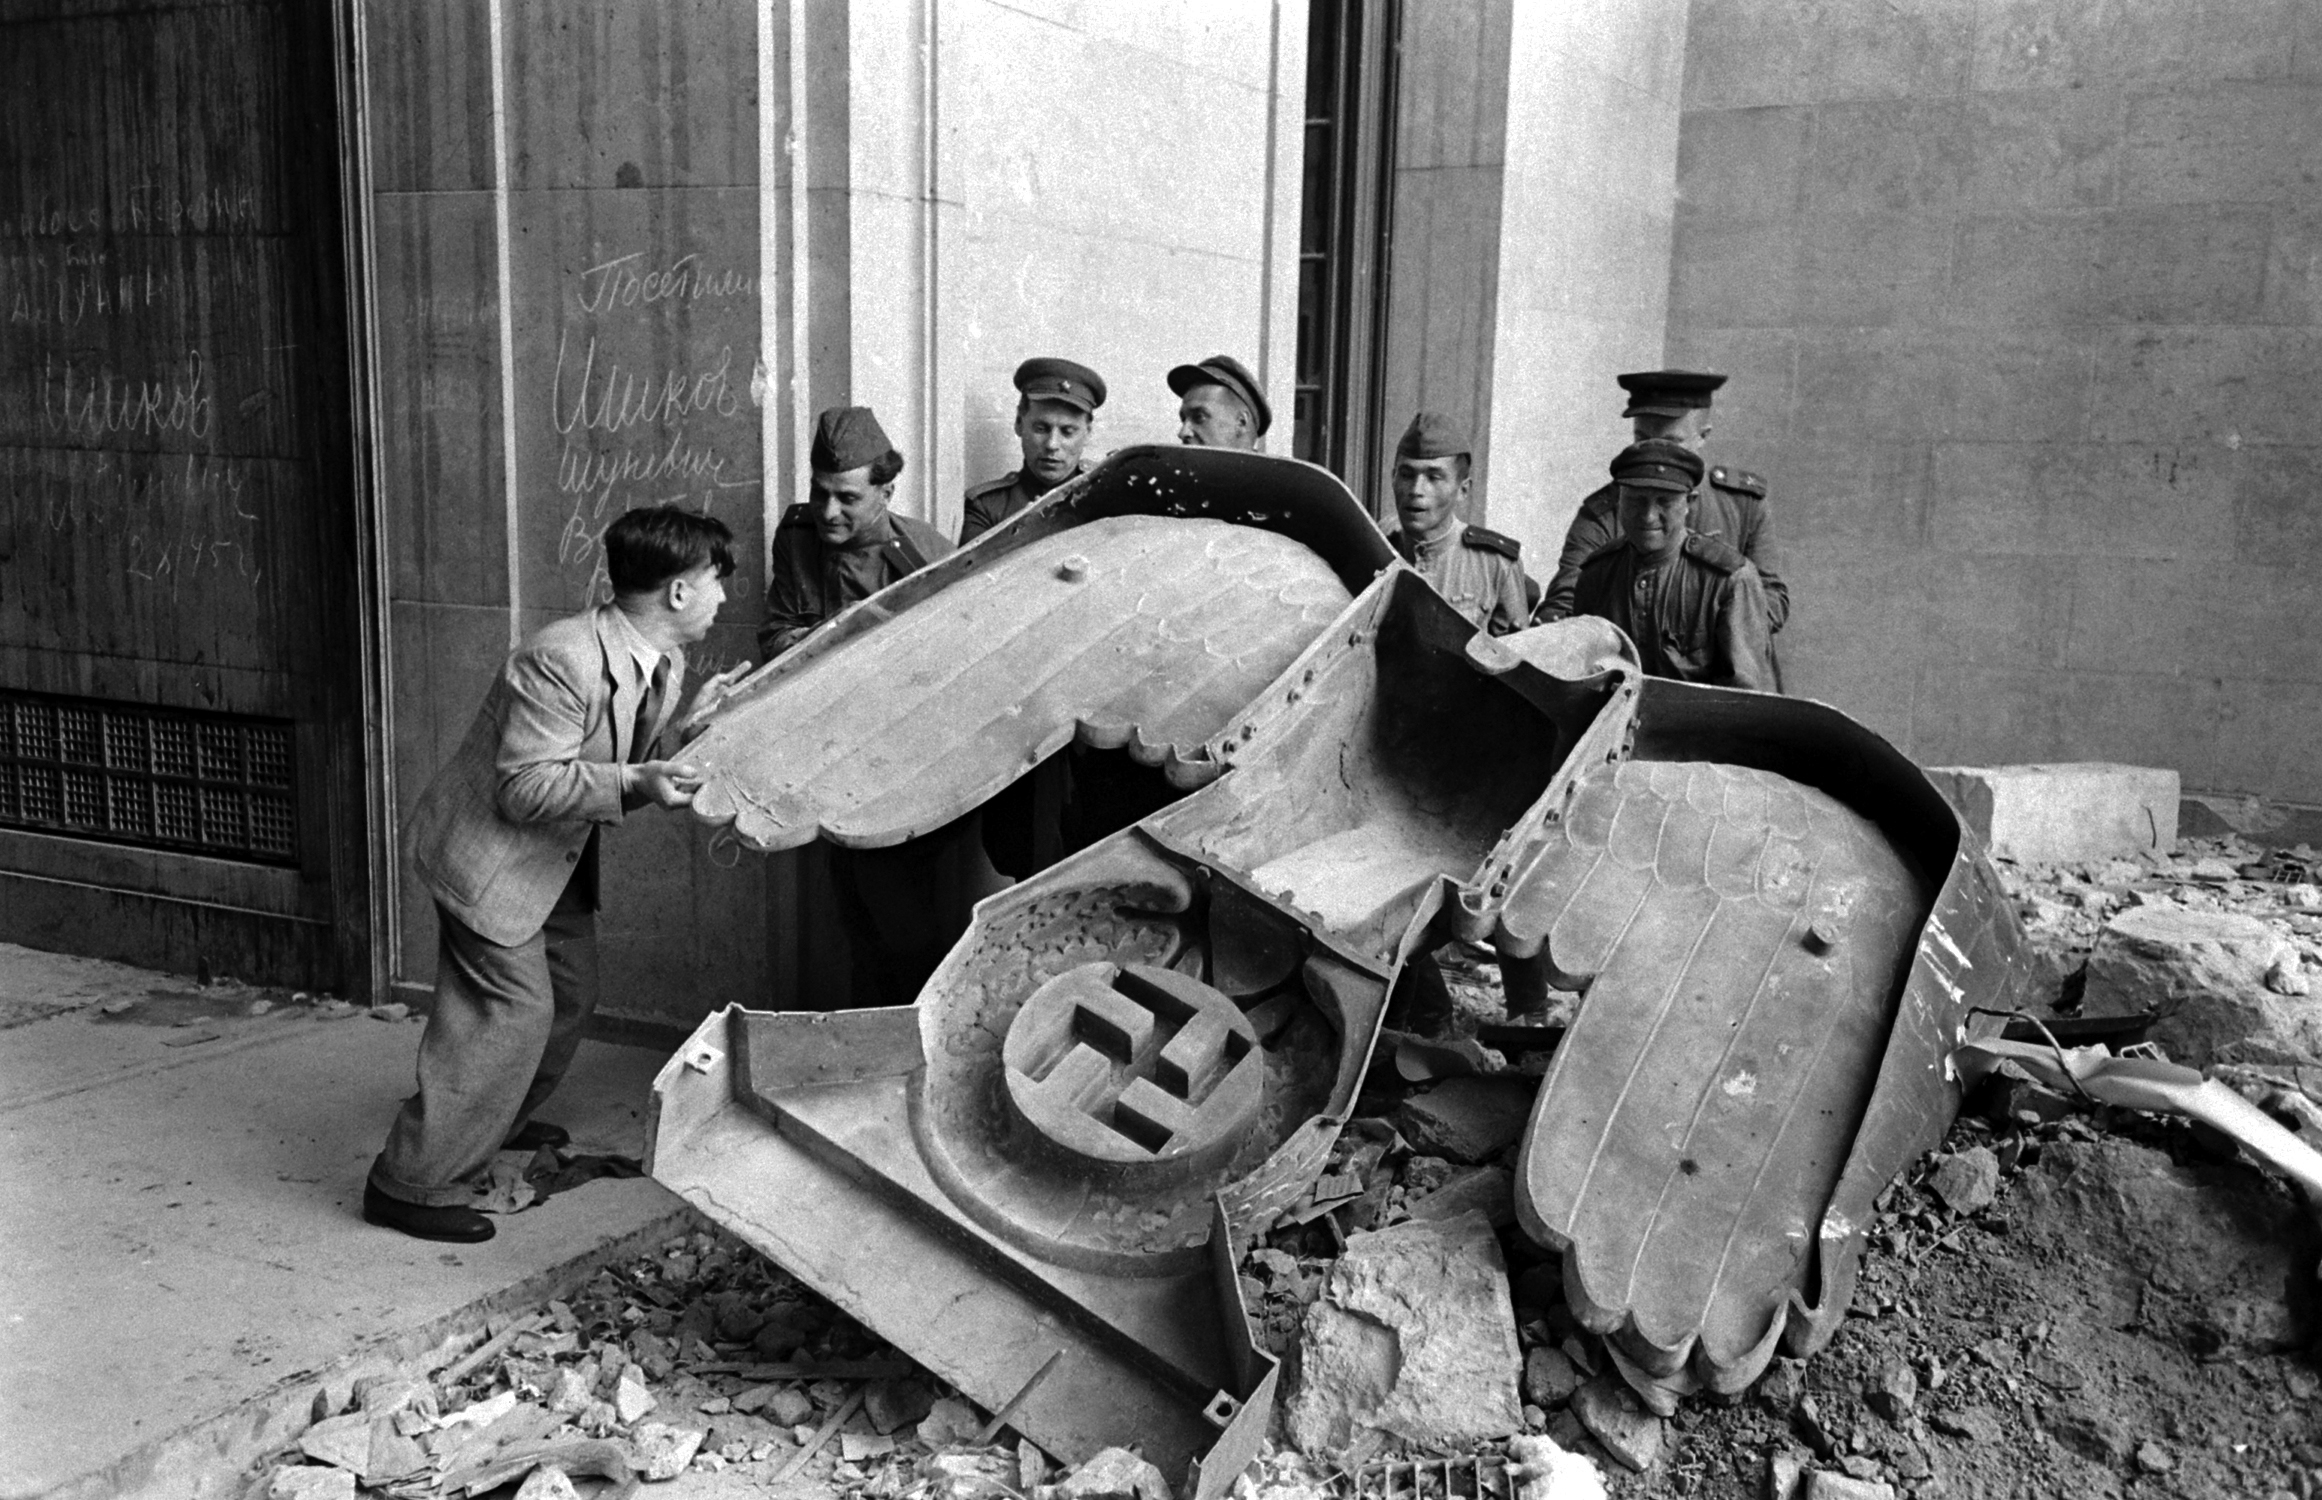 Russian soldiers and a civilian struggle to move a large bronze Nazi Party eagle that once loomed over a doorway of the Reich Chancellery, Berlin, 1945. (Alex Majoli—Magnum with the support of Save The Dream, Instituto Moreira Salles and ESPN)